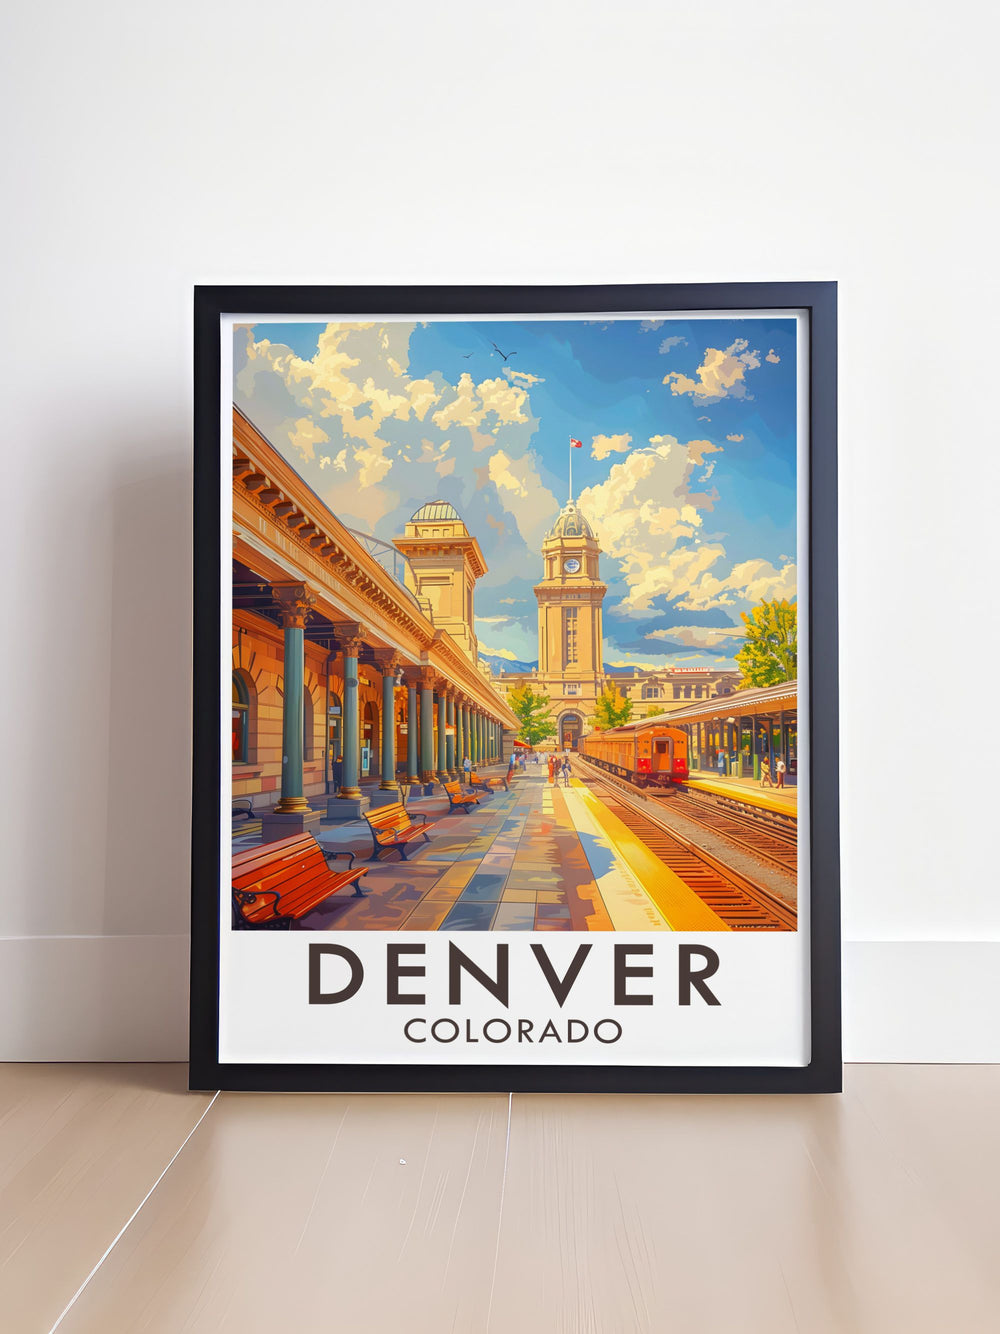 Boulder Colorado is beautifully depicted in this poster, showcasing its lively arts scene and stunning natural surroundings, making it a great addition to any art collection.